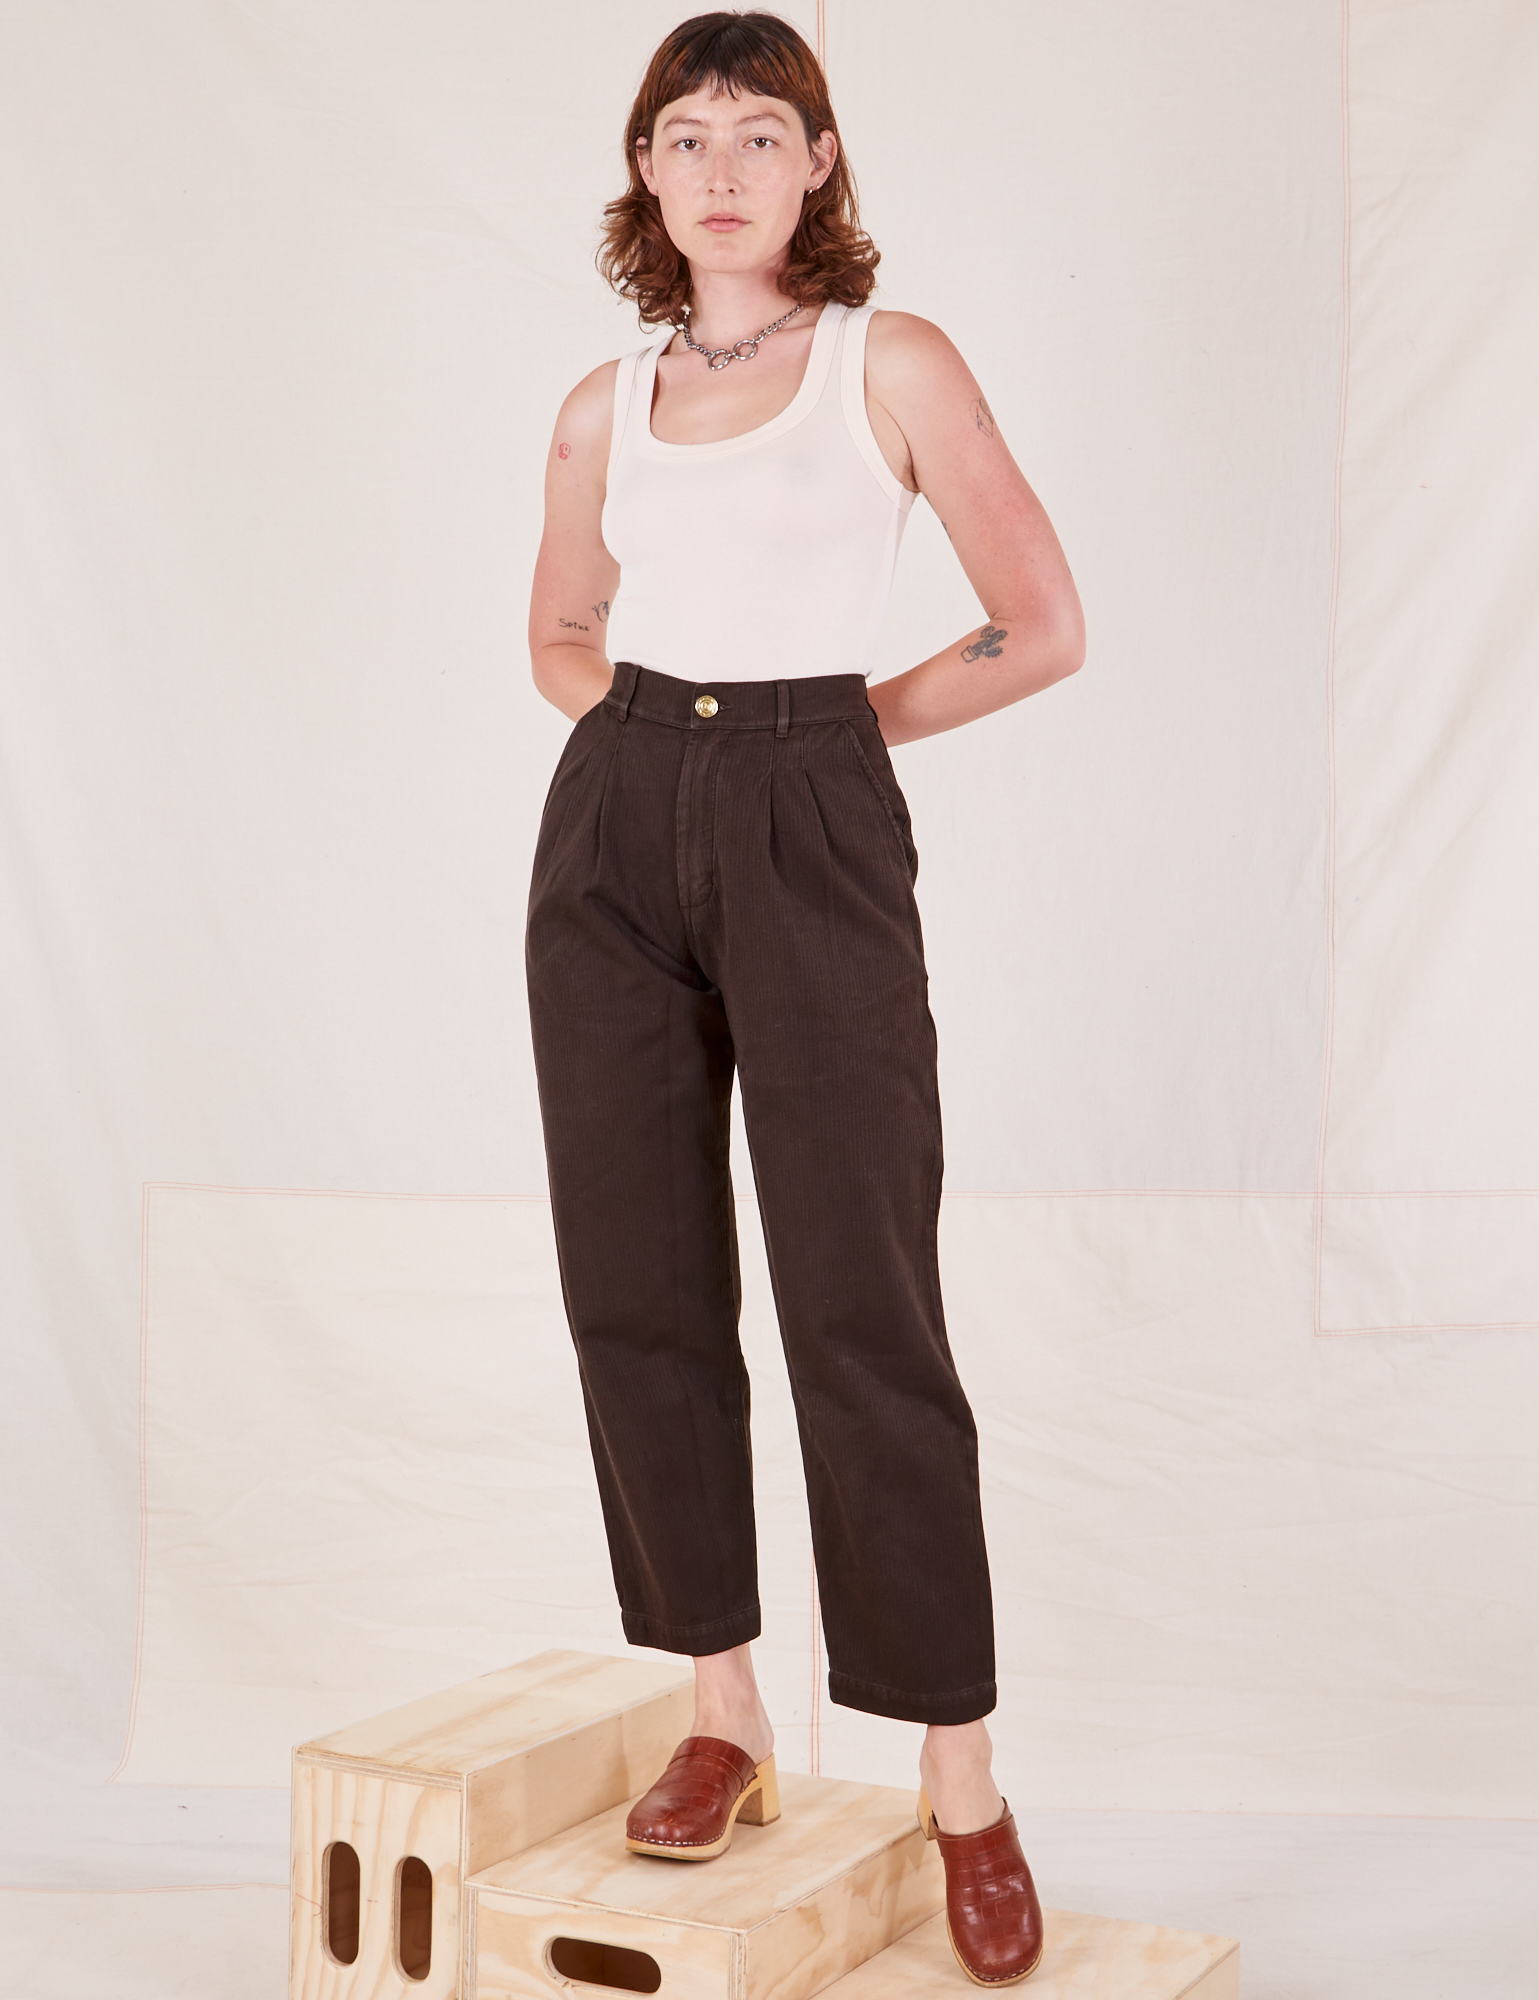 Alex is 5&#39;8&quot; and wearing XXS Heritage Trousers in Espresso Brown paired with vintage off-white Tank Top